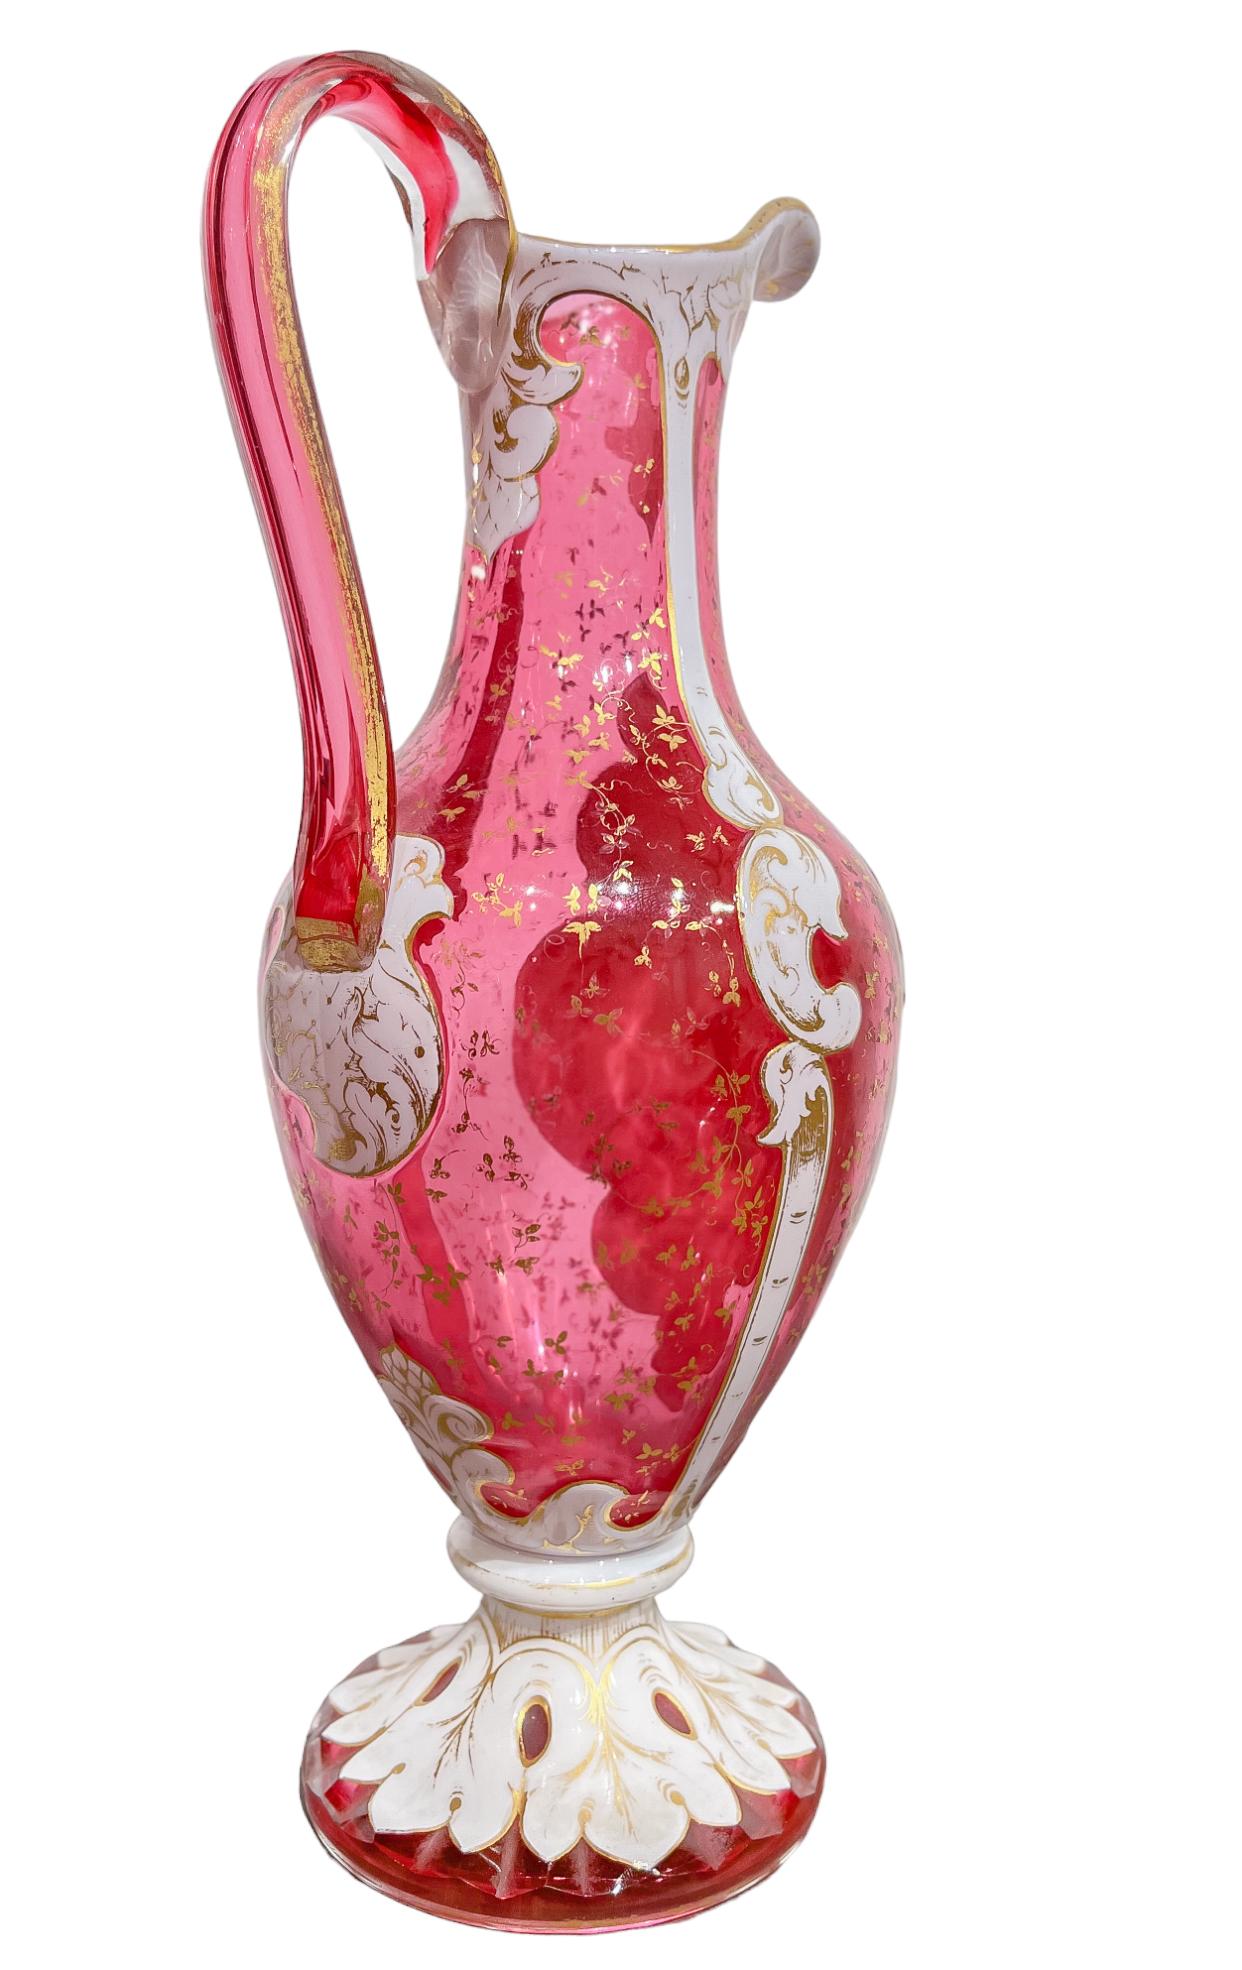  Bohemian Glass Pitcher with Jewel Painting and White Enamel  In Good Condition For Sale In New York, NY